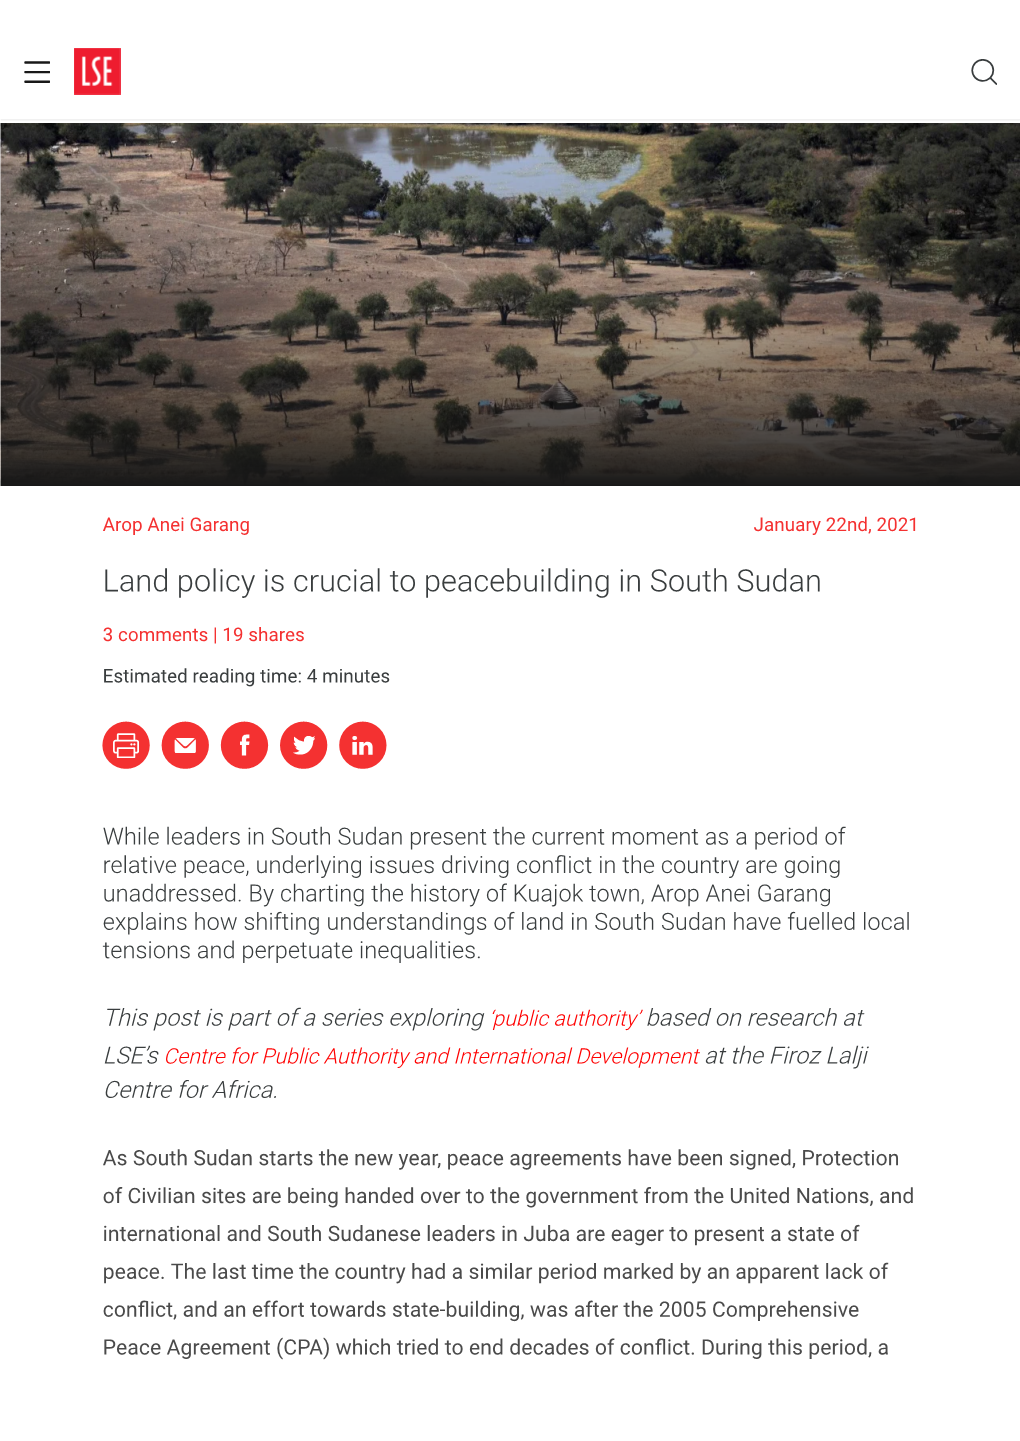 Land Policy Is Crucial to Peacebuilding in South Sudan